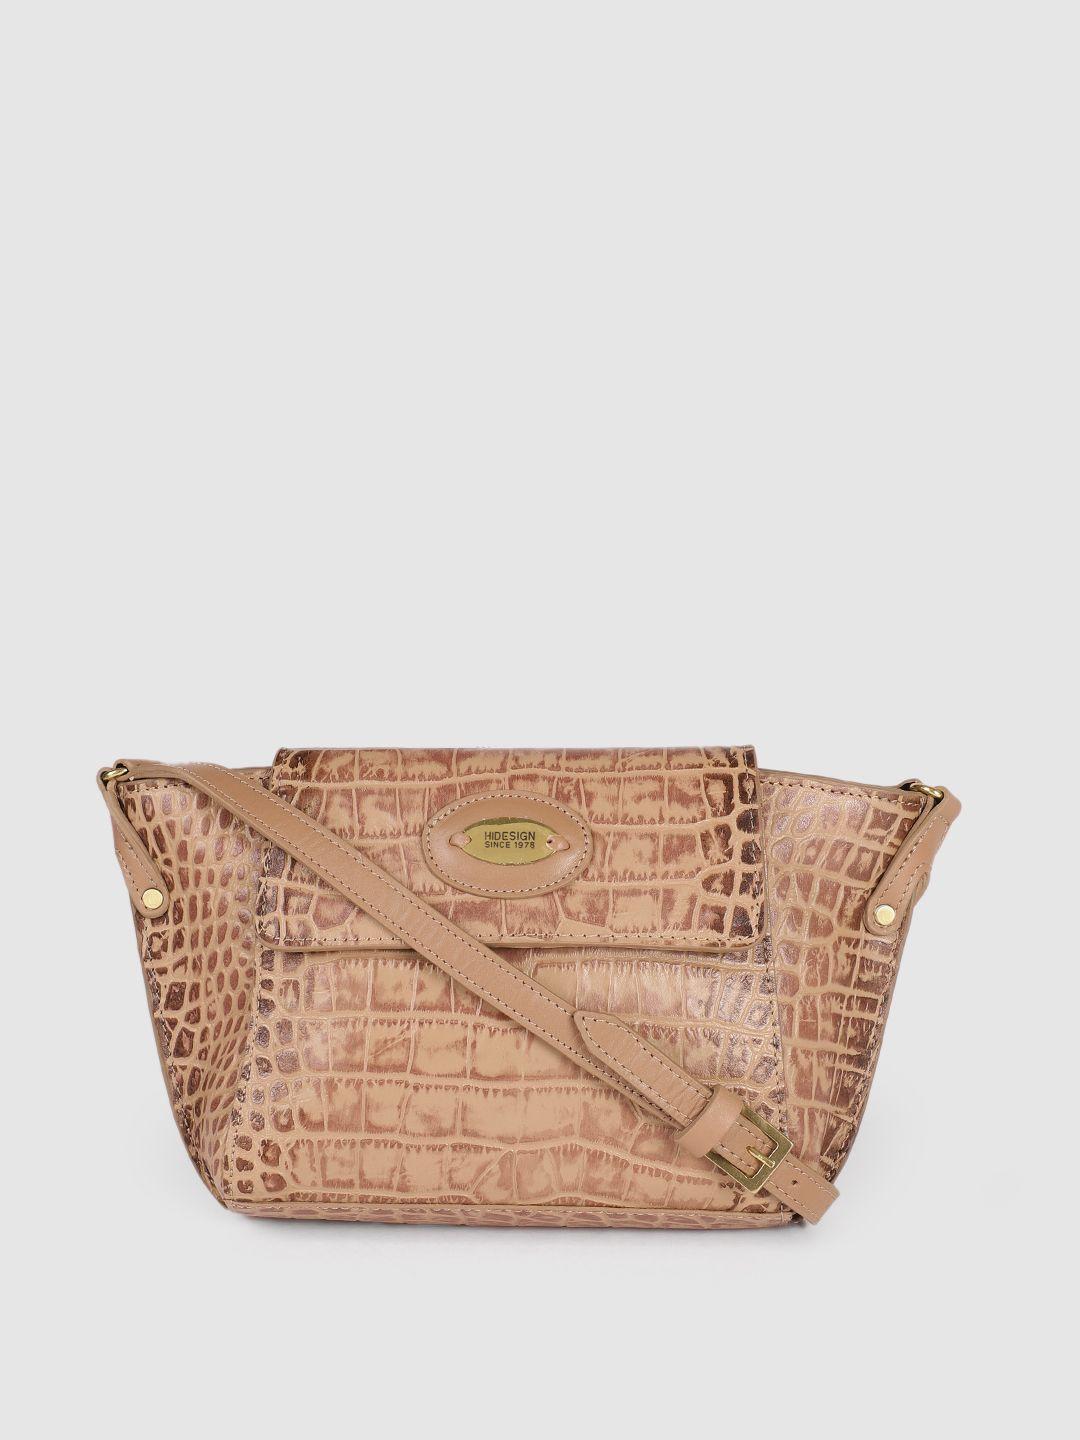 hidesign nude-coloured textured leather structured sling bag